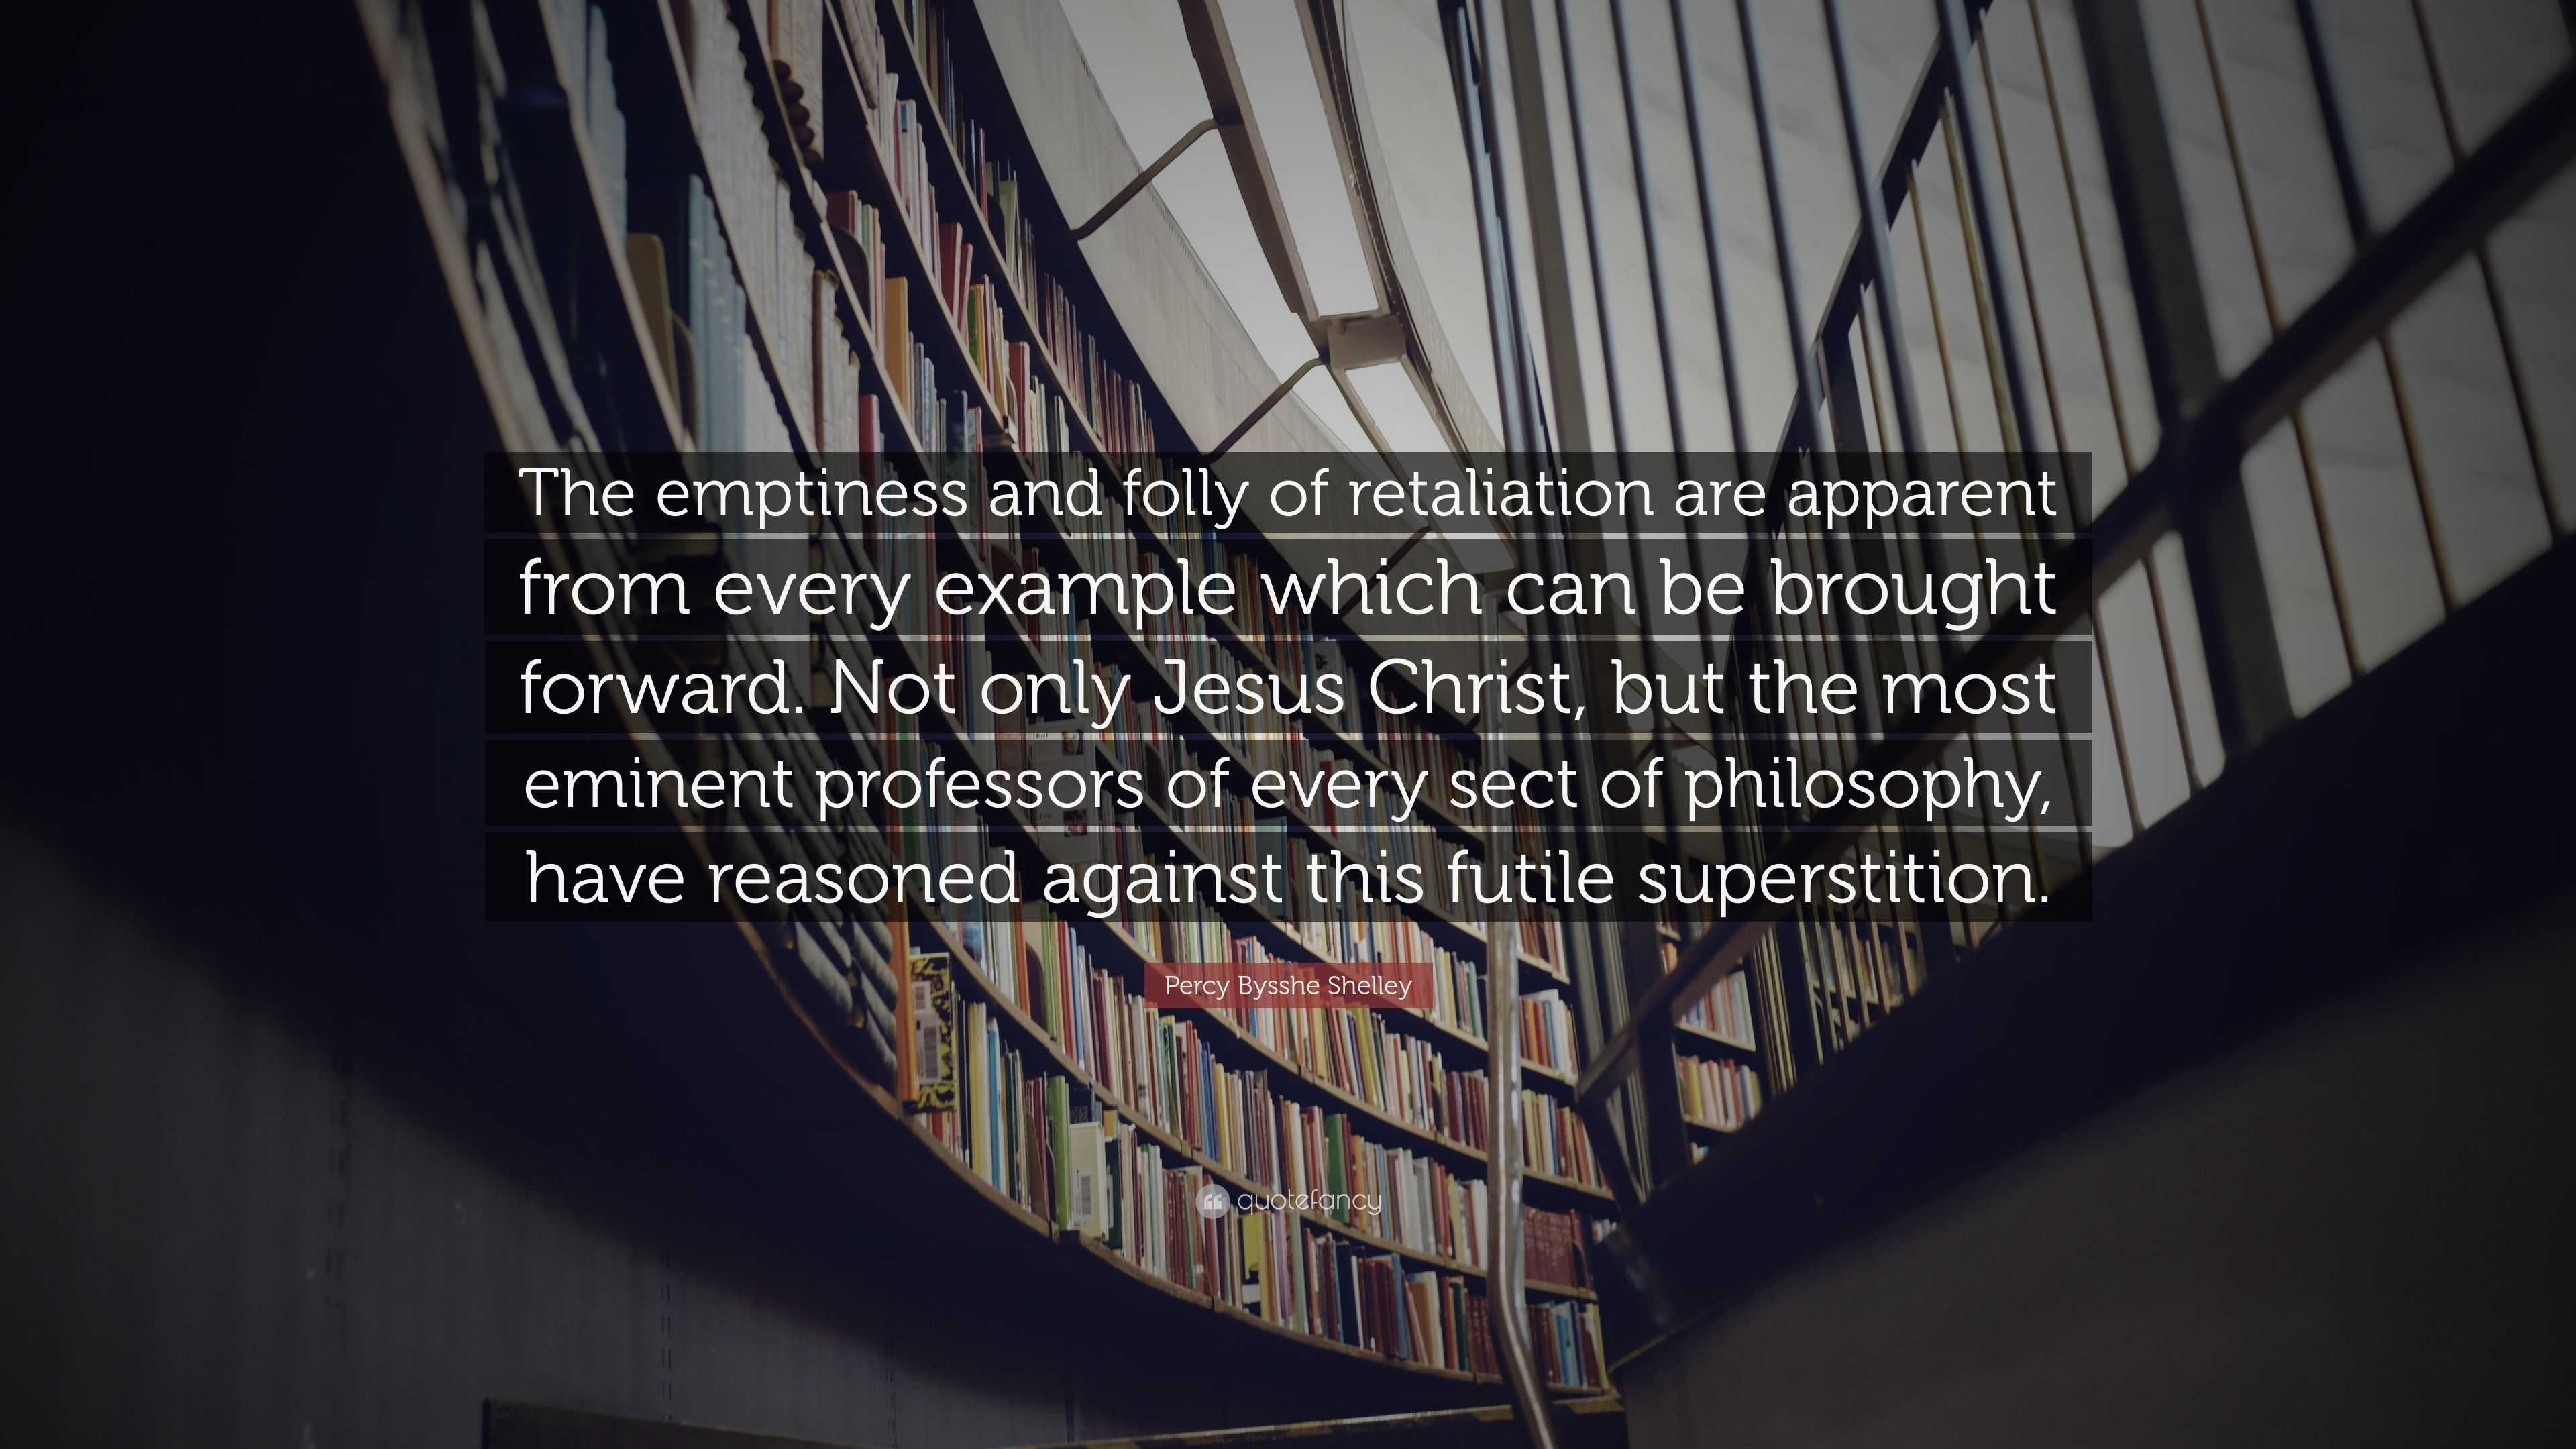 Percy Bysshe Shelley Quote: “The emptiness and folly of retaliation are  apparent from every example which can be brought forward. Not only Jesus  Chri...”